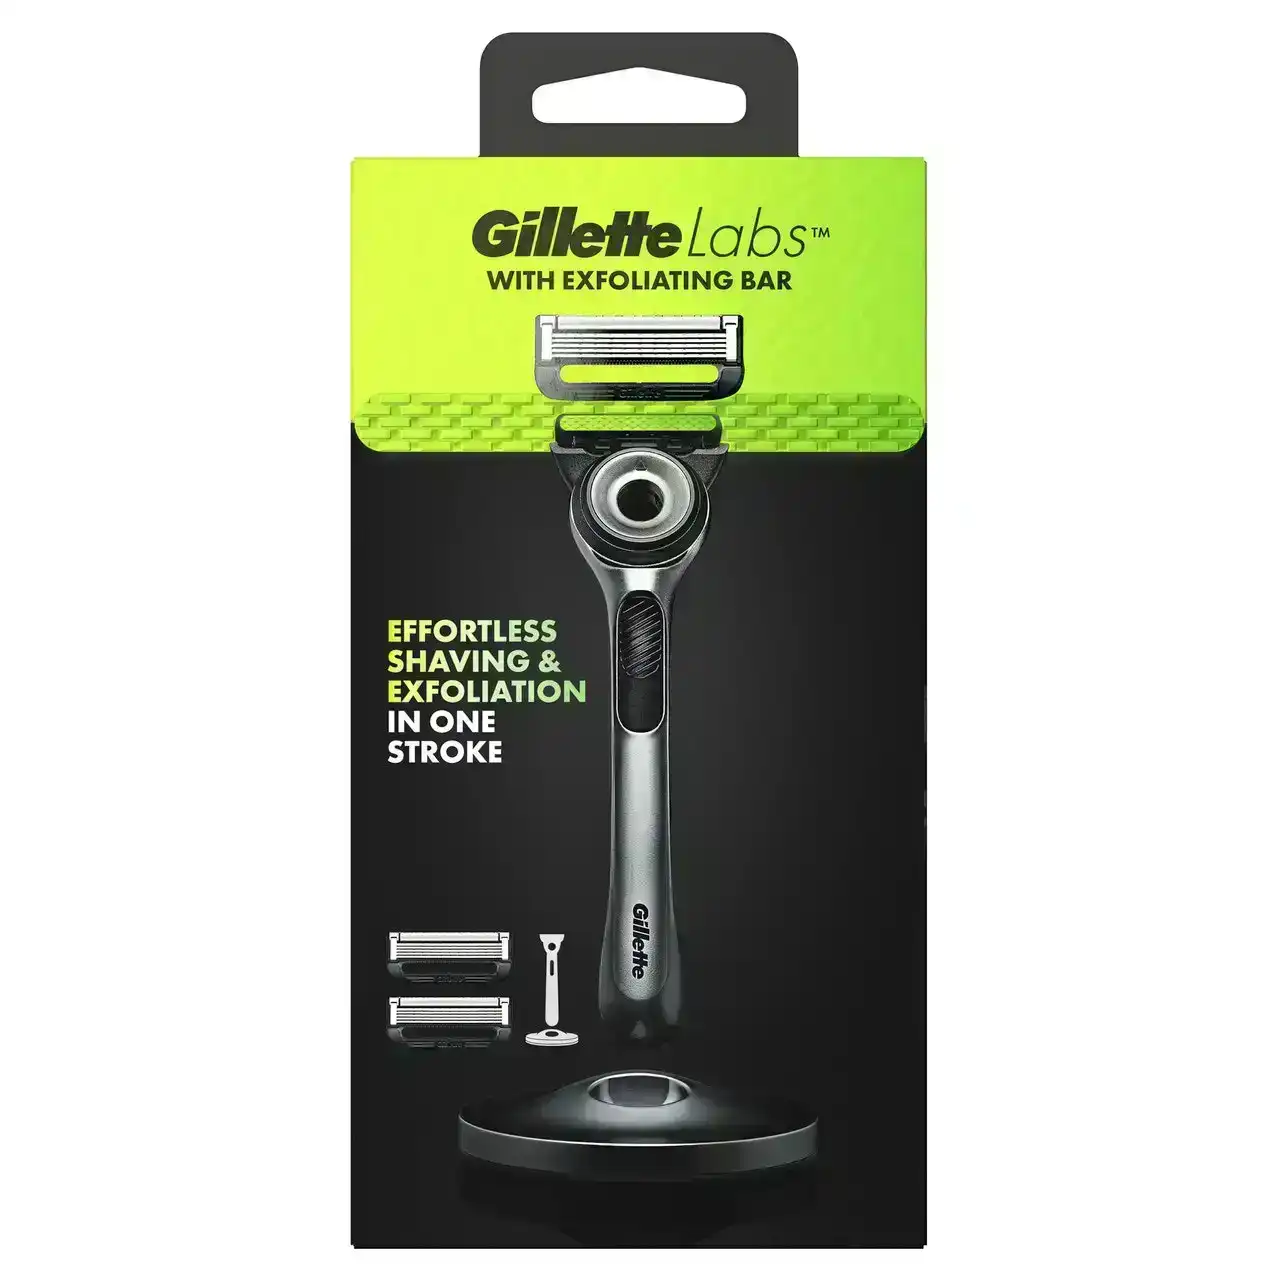 Gillette Labs with Exfoliating Bar Razor for men, 1 Handle, 2 Razor Blade Refills, and Premium Magnetic Stand